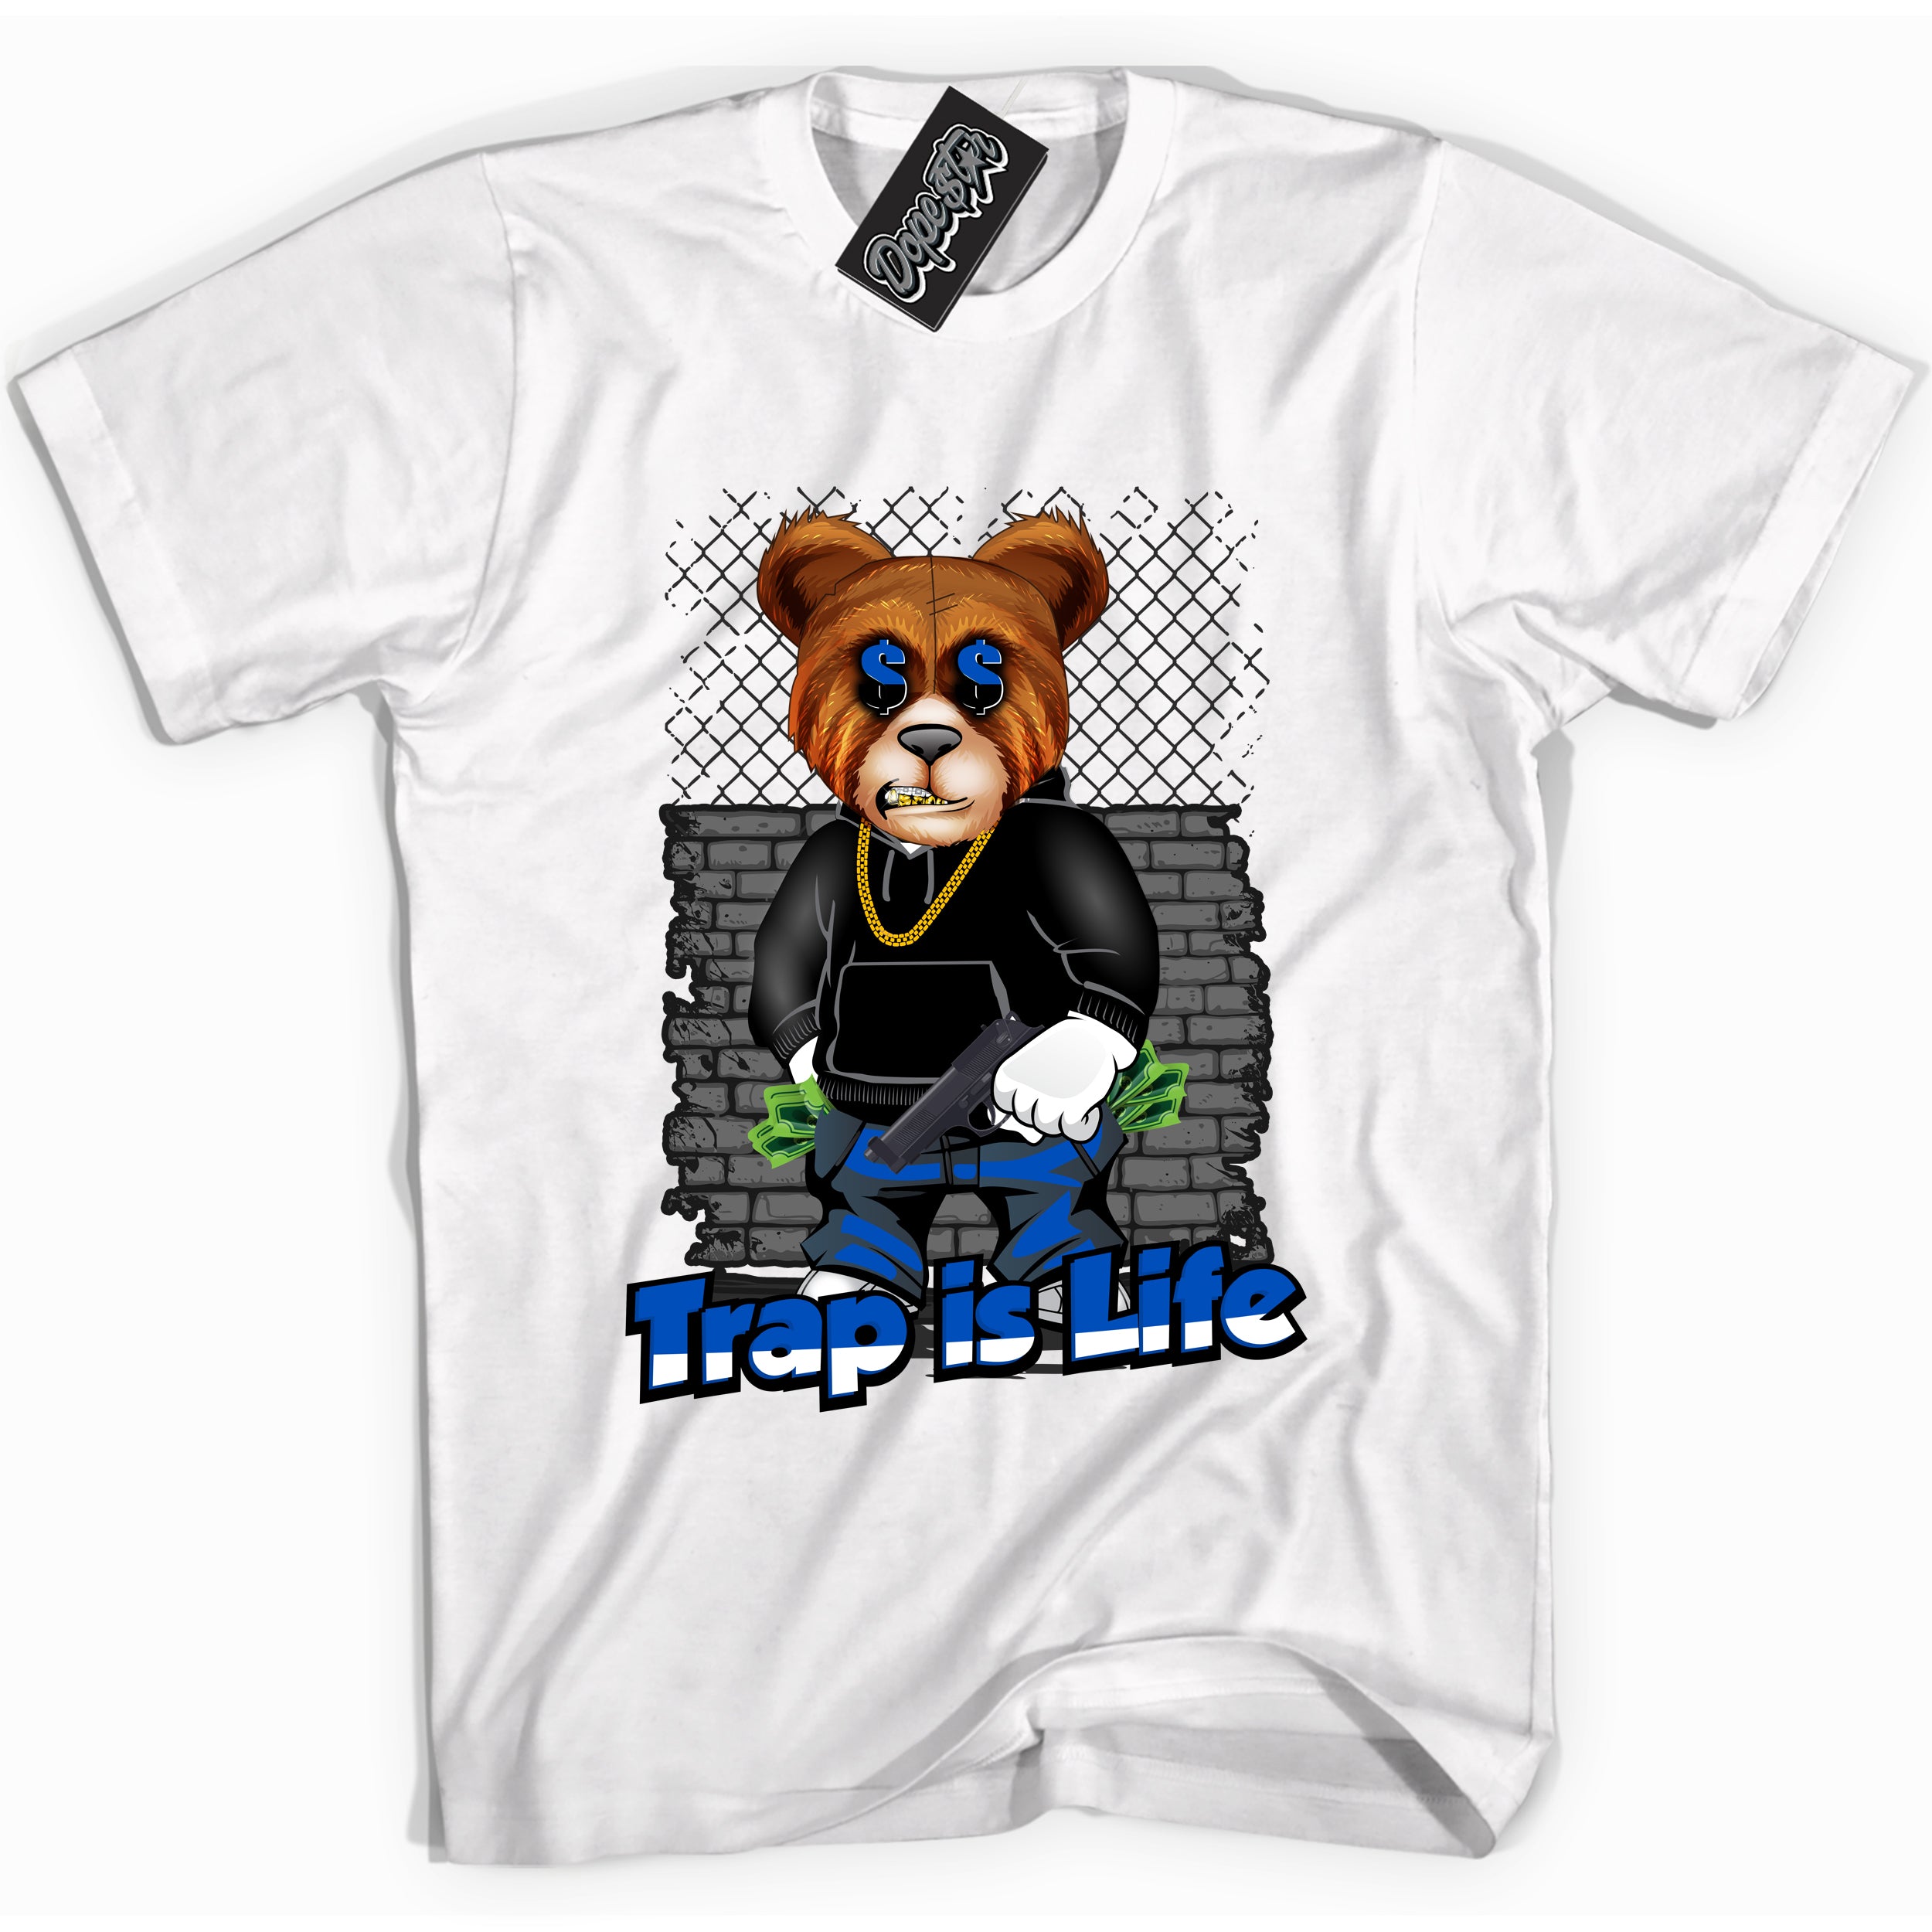 Cool White graphic tee with "Trap Is Life" design, that perfectly matches Royal Reimagined 1s sneakers 